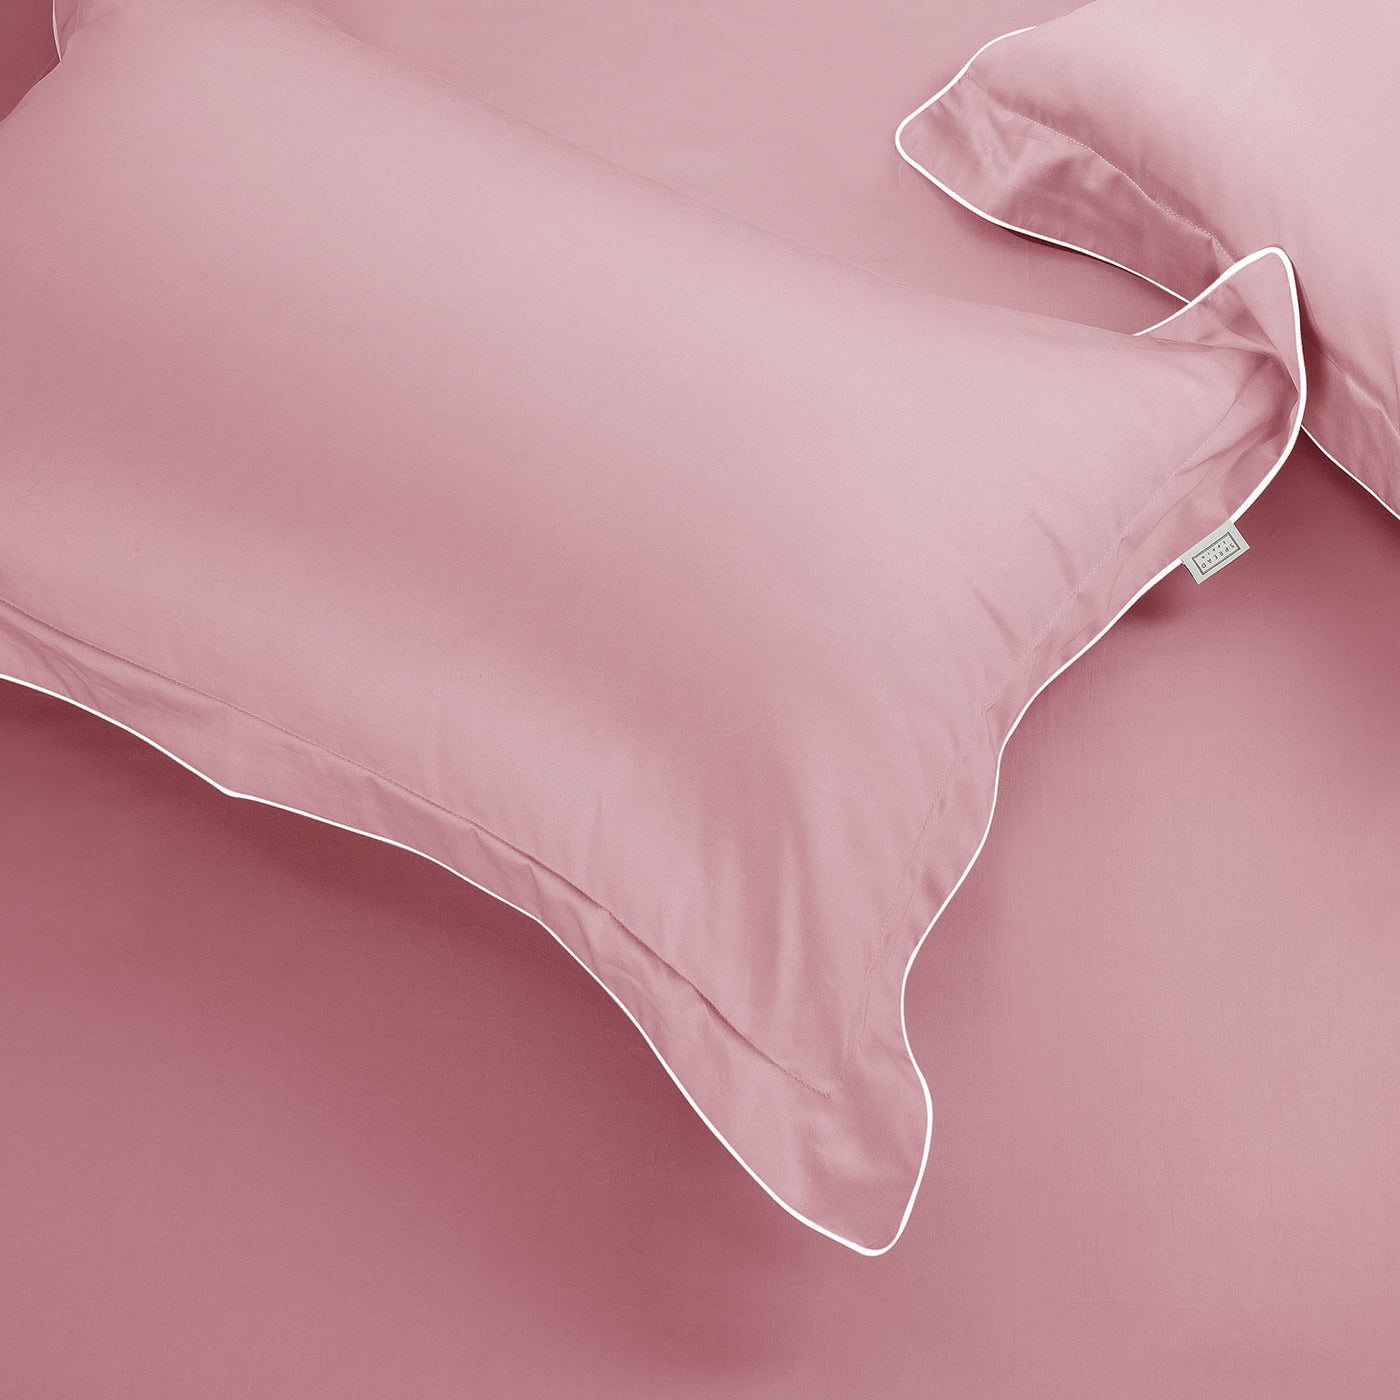 500 THREAD COUNT ITALIAN COTTON PINK PILLOW COVER